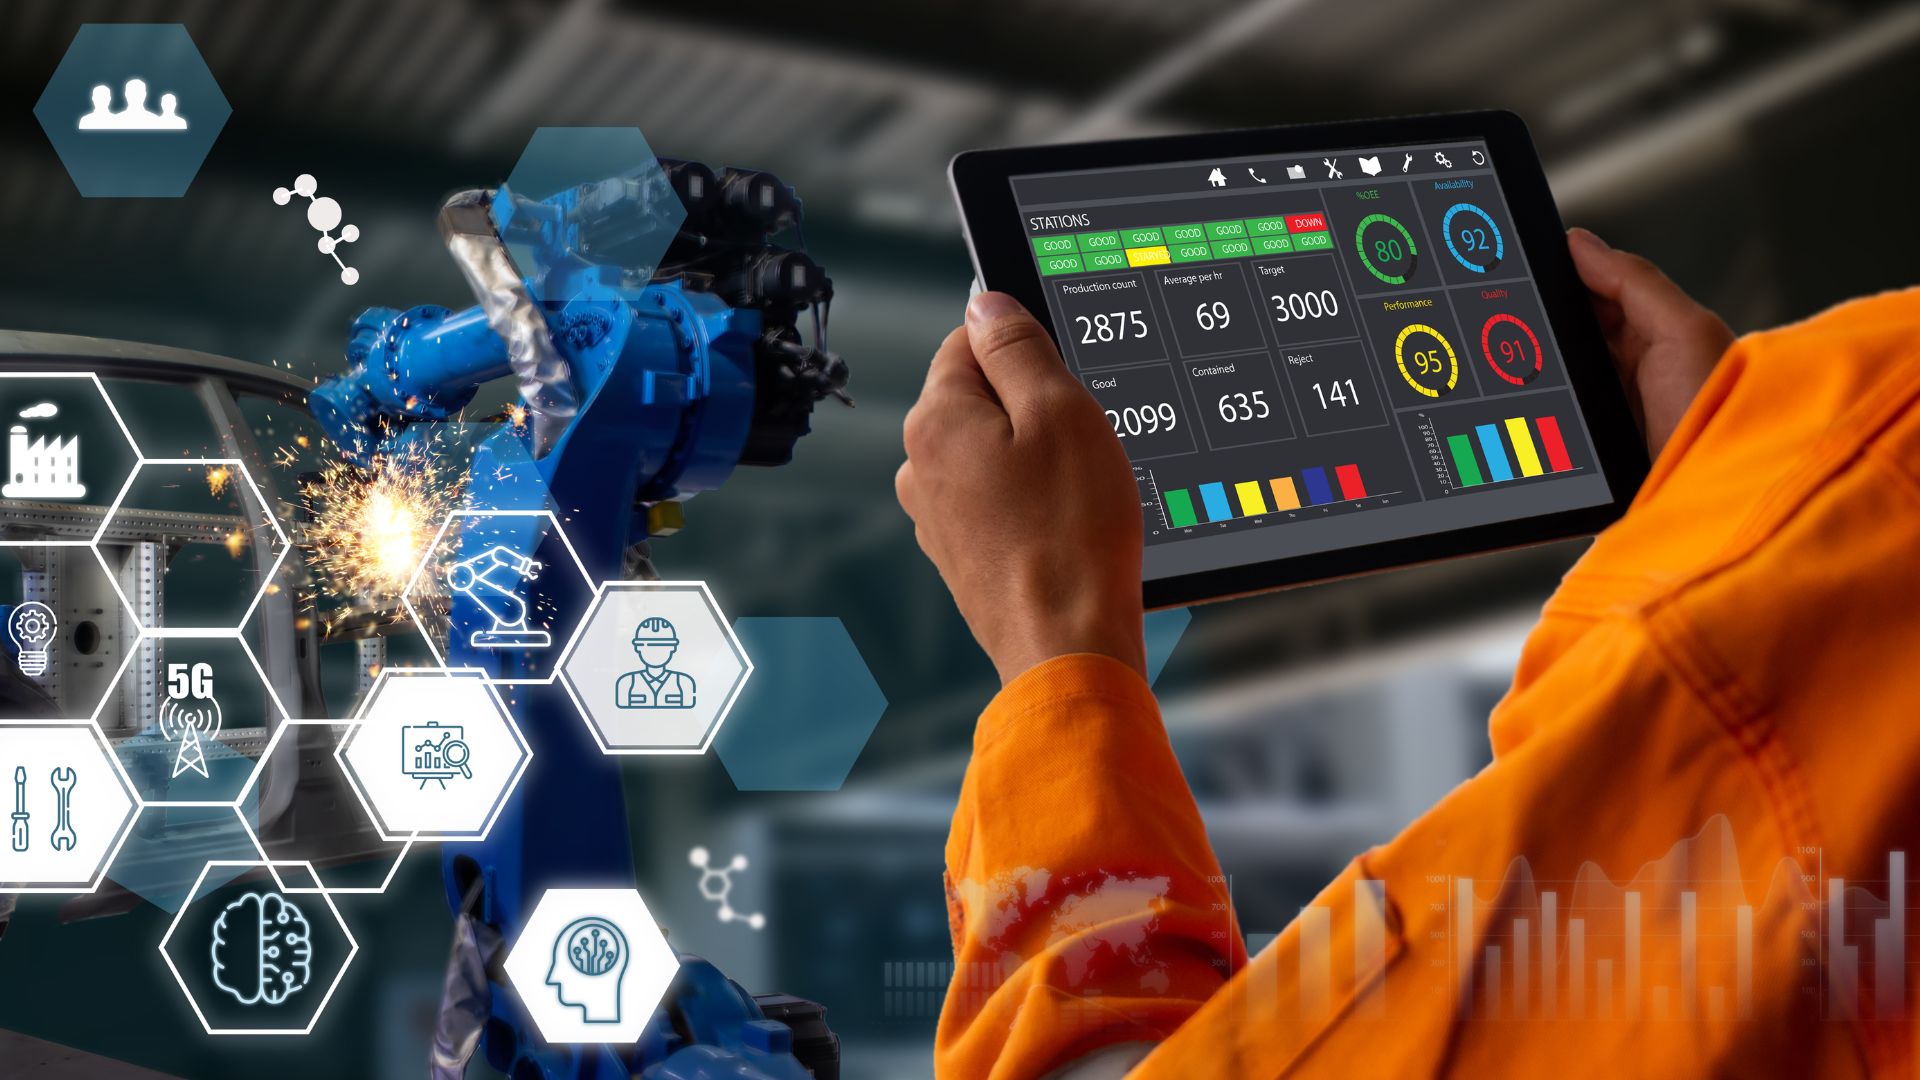 Eontes: A Name for the Future of Digital Transformation in Manufacturing Companies